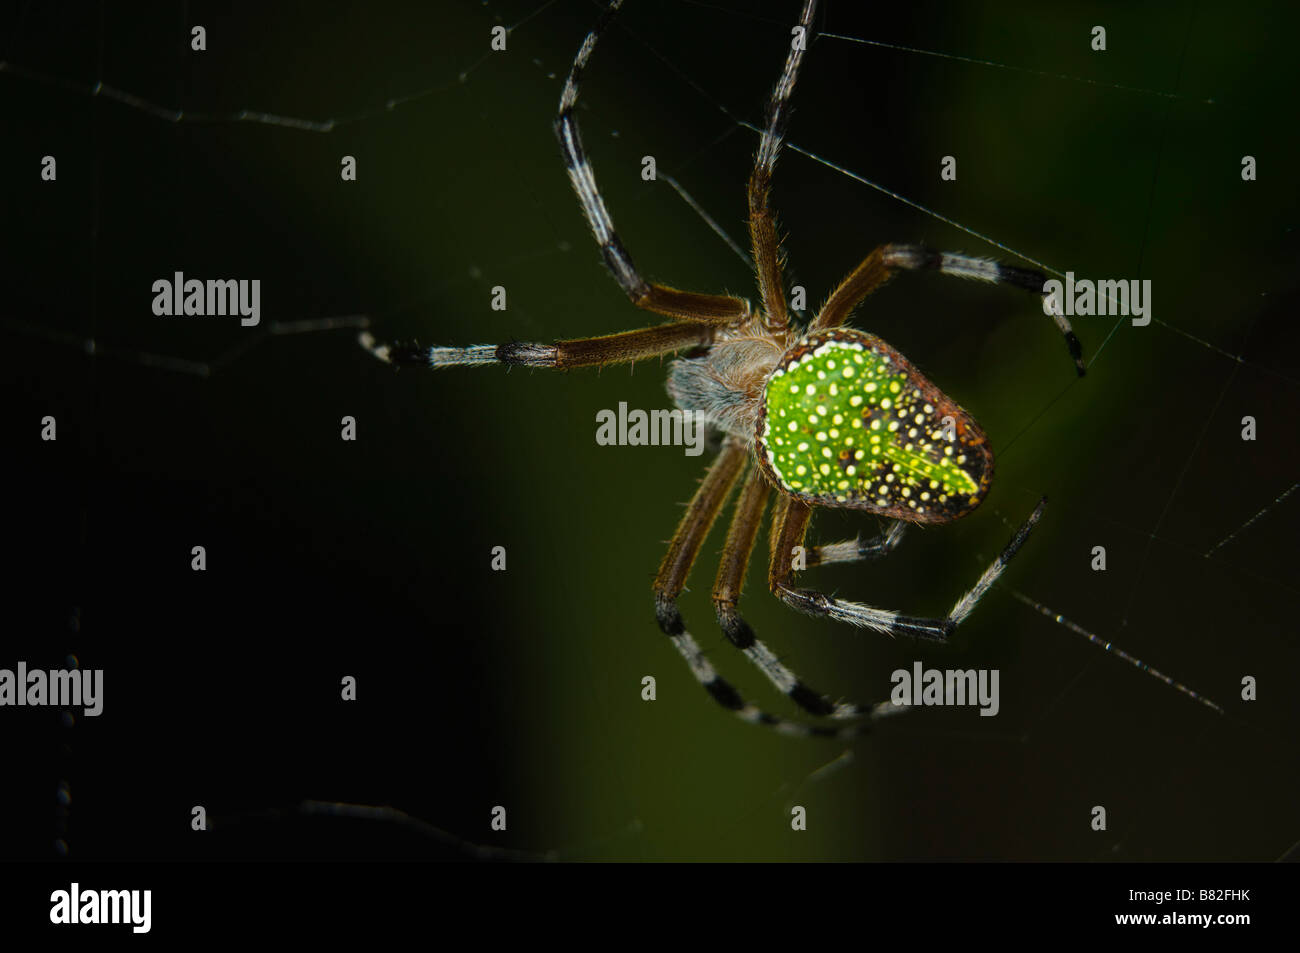 Green-backed orb spider Stock Photo